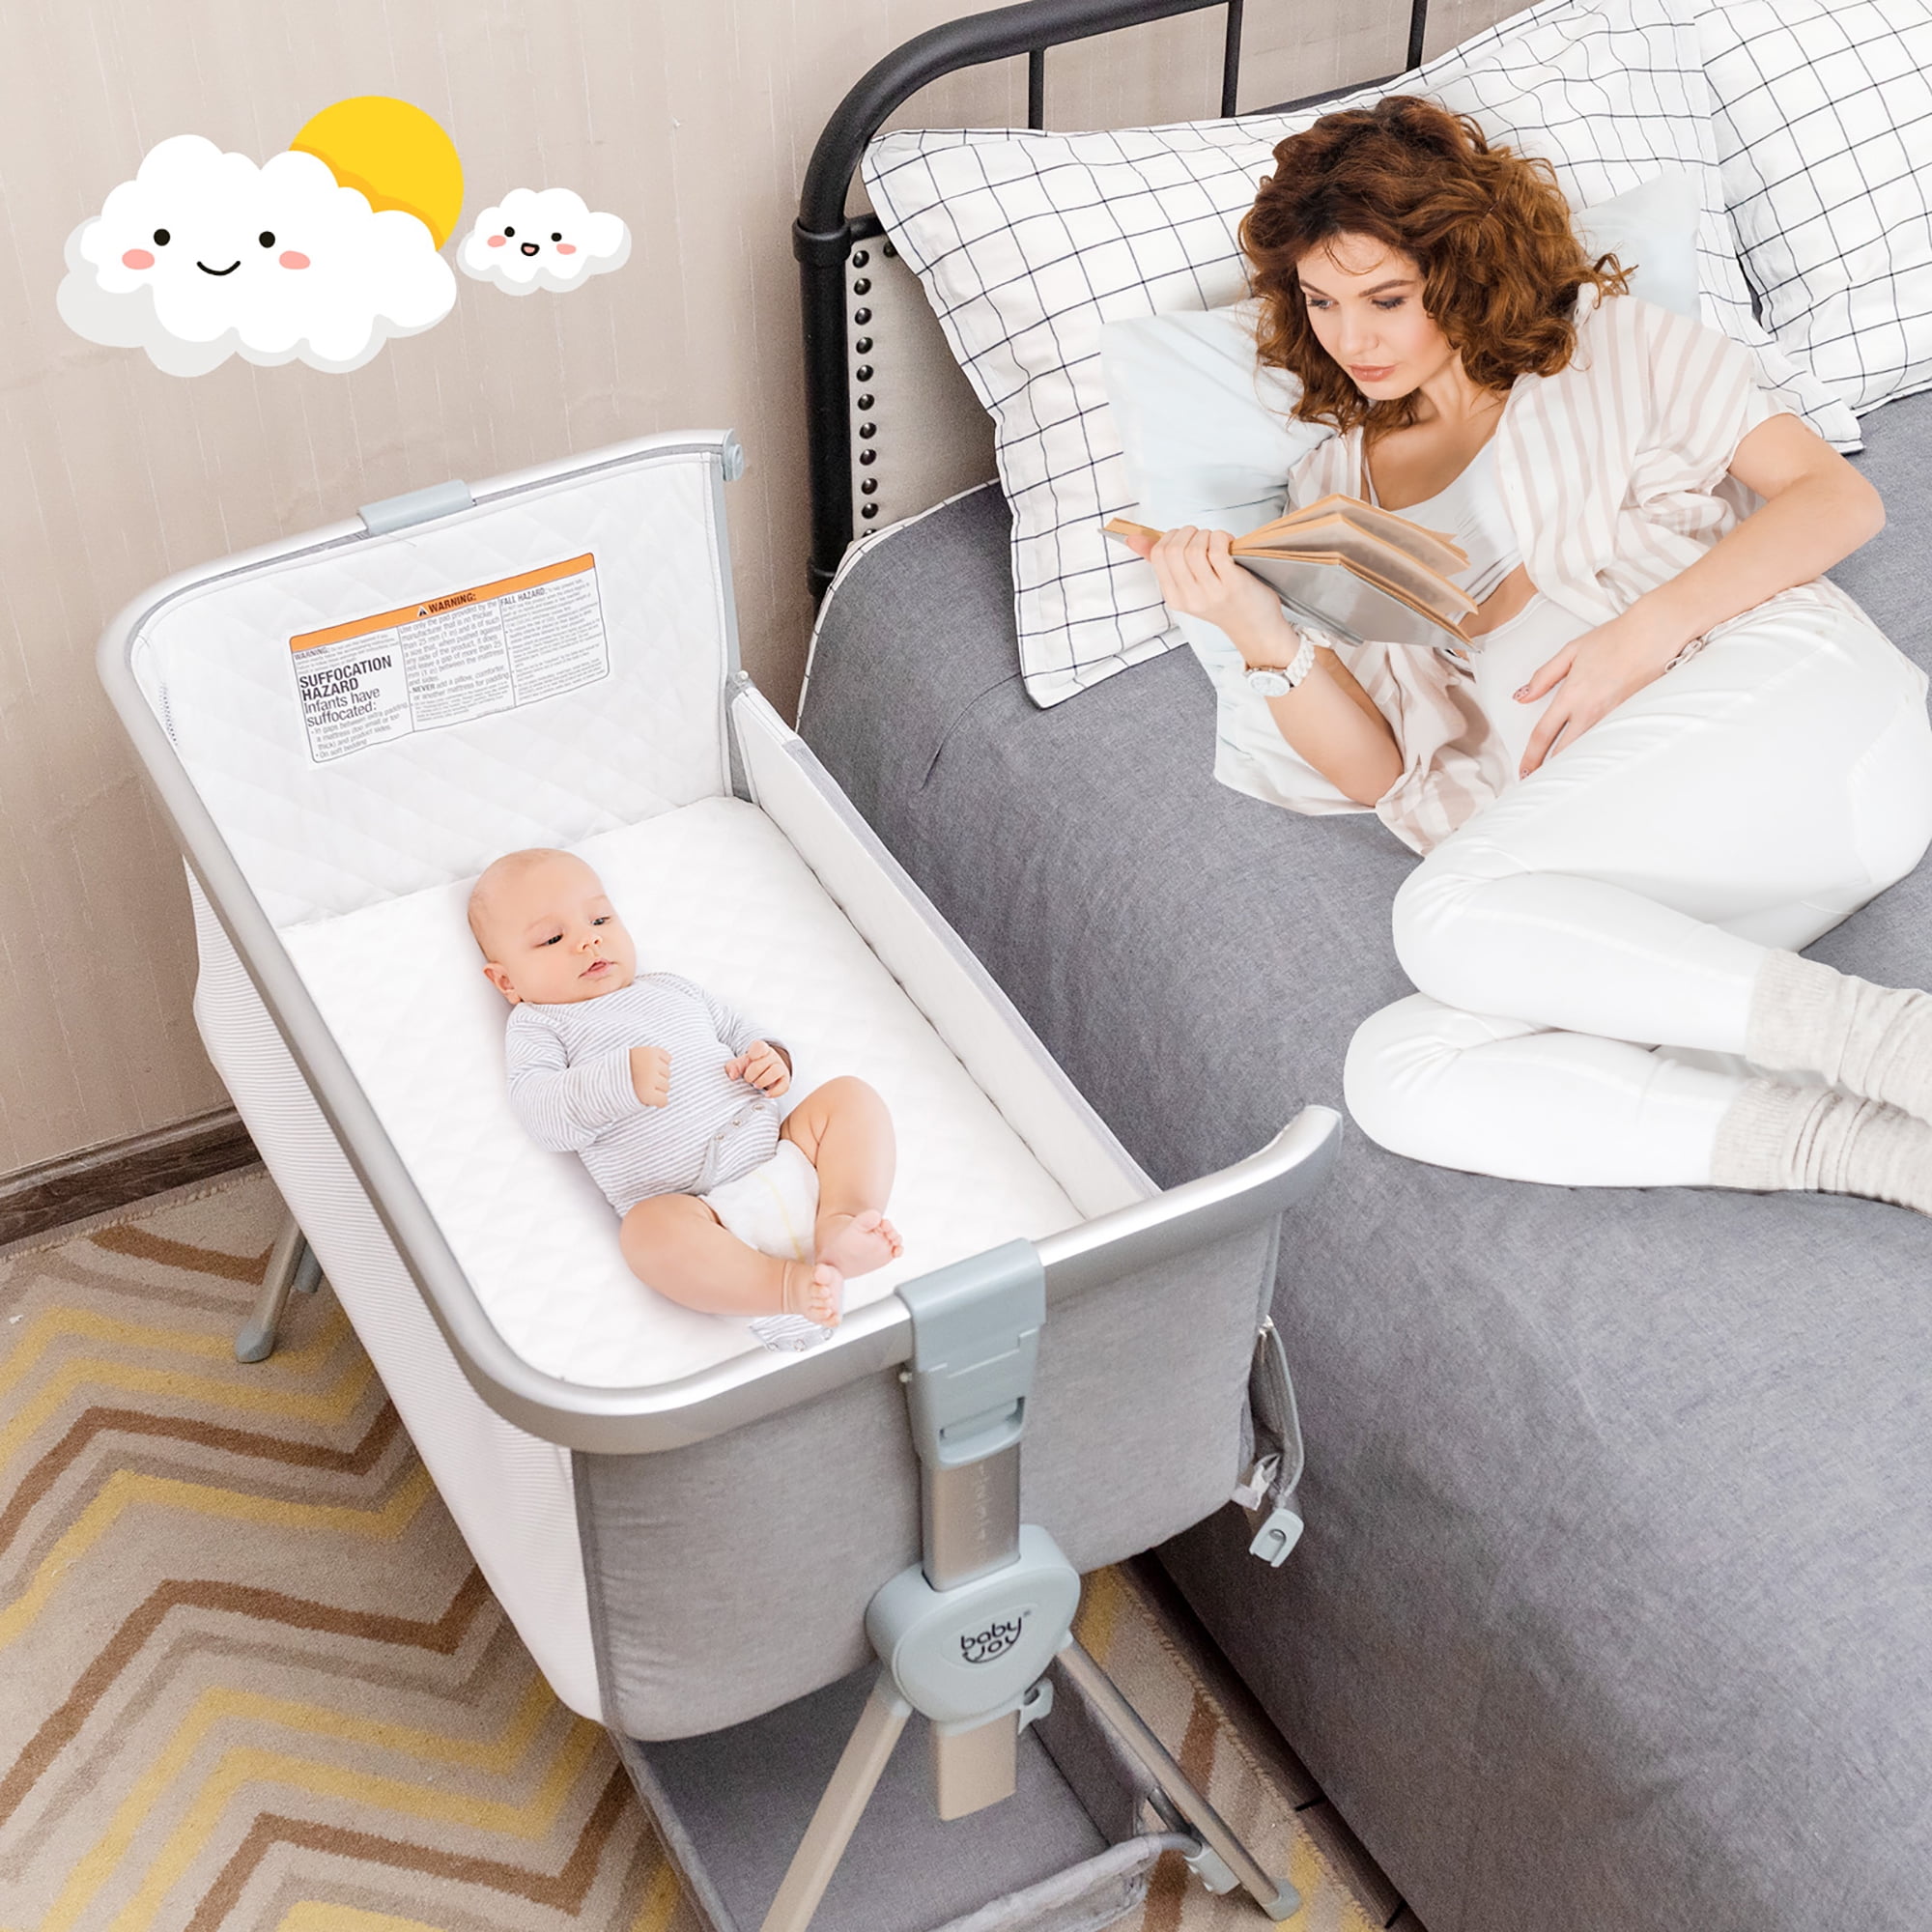 Foldable Bedside Sleeper with Breathable Mesh & Mattress Adjustable Height & Angle Bed to Bed Baby Crib Bed for Infants Newborn Girl Boy Blue HONEY JOY Baby Bassinet 